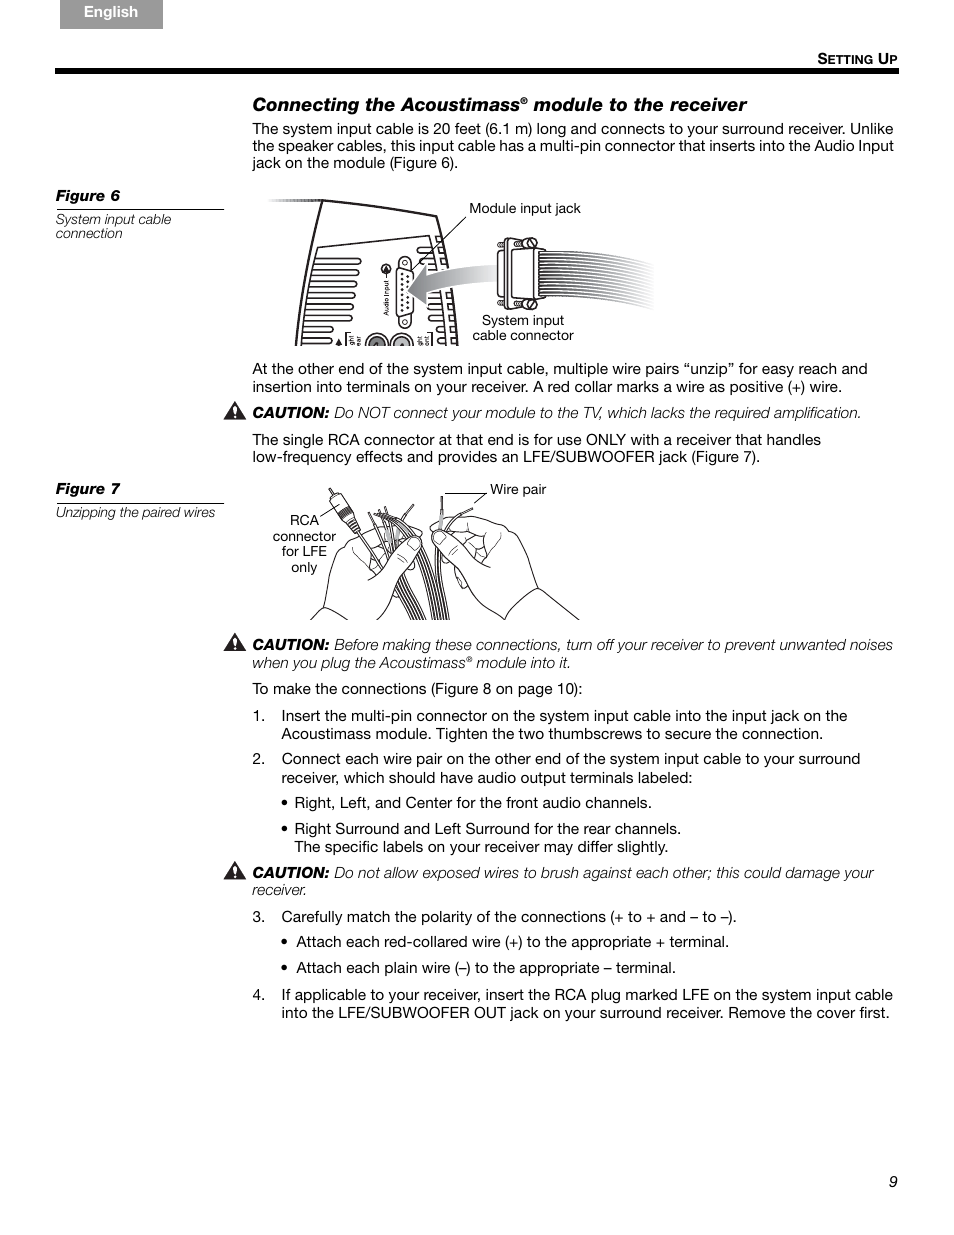 Connecting the acoustimass, Module to the receiver | Bose Acoustimass 6  Series III User Manual | Page 9 / 16